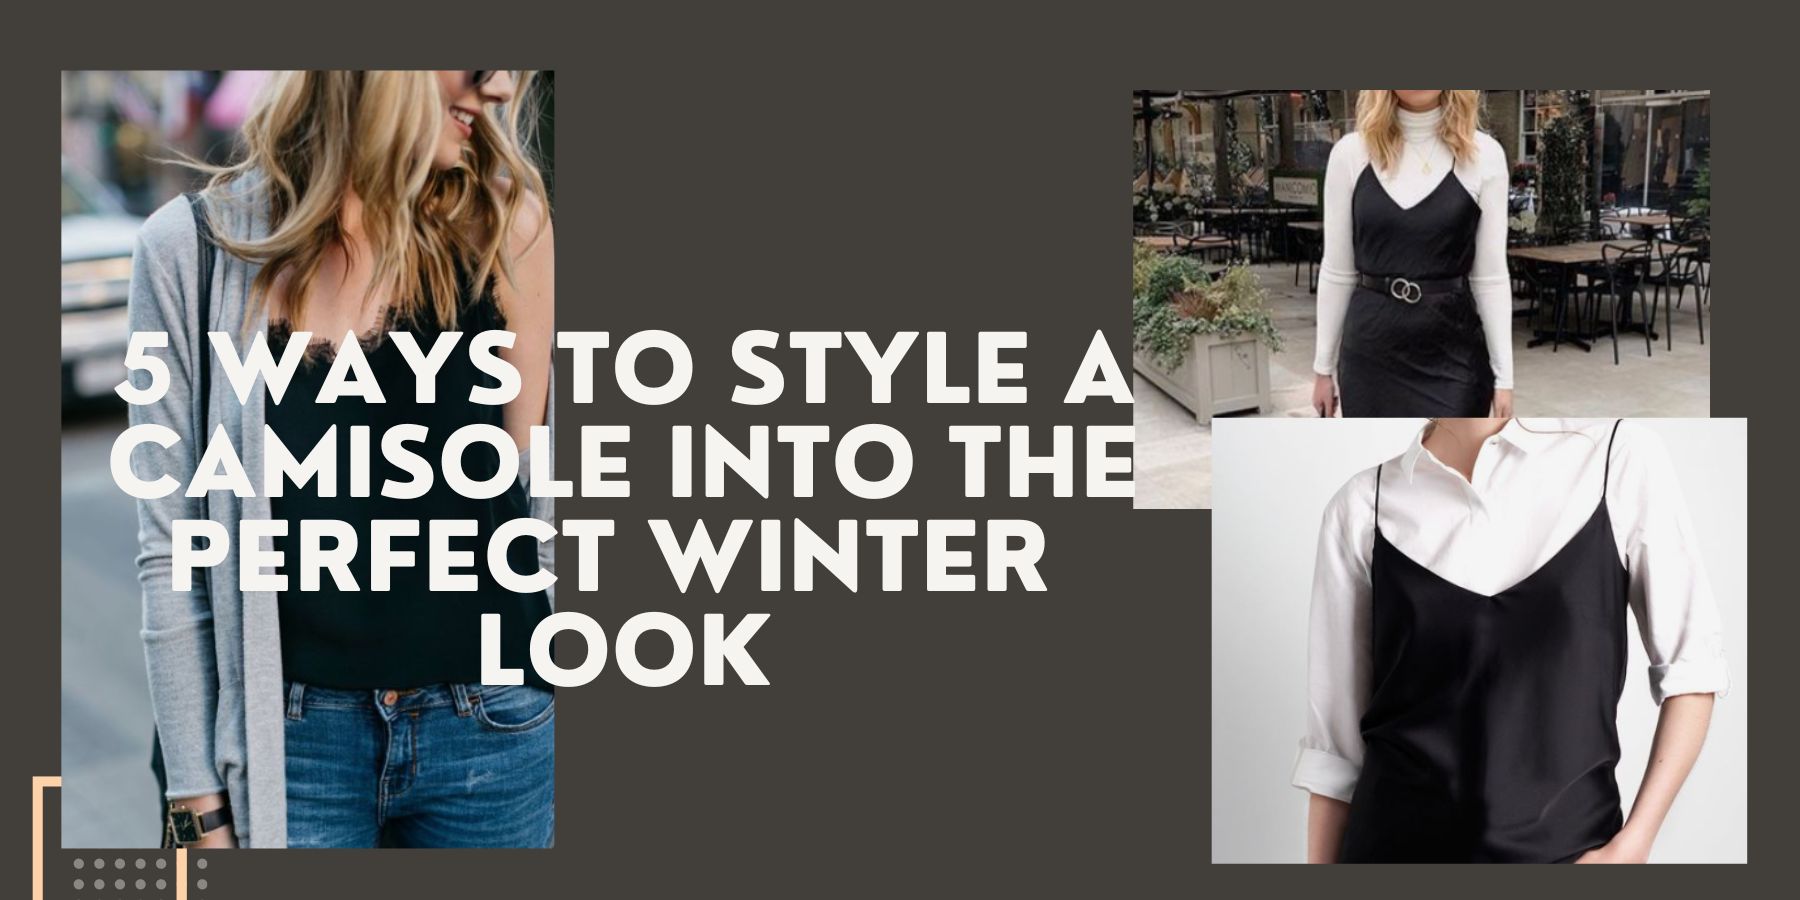 5 Ways to Style a Camisole Into the Perfect Winter Look